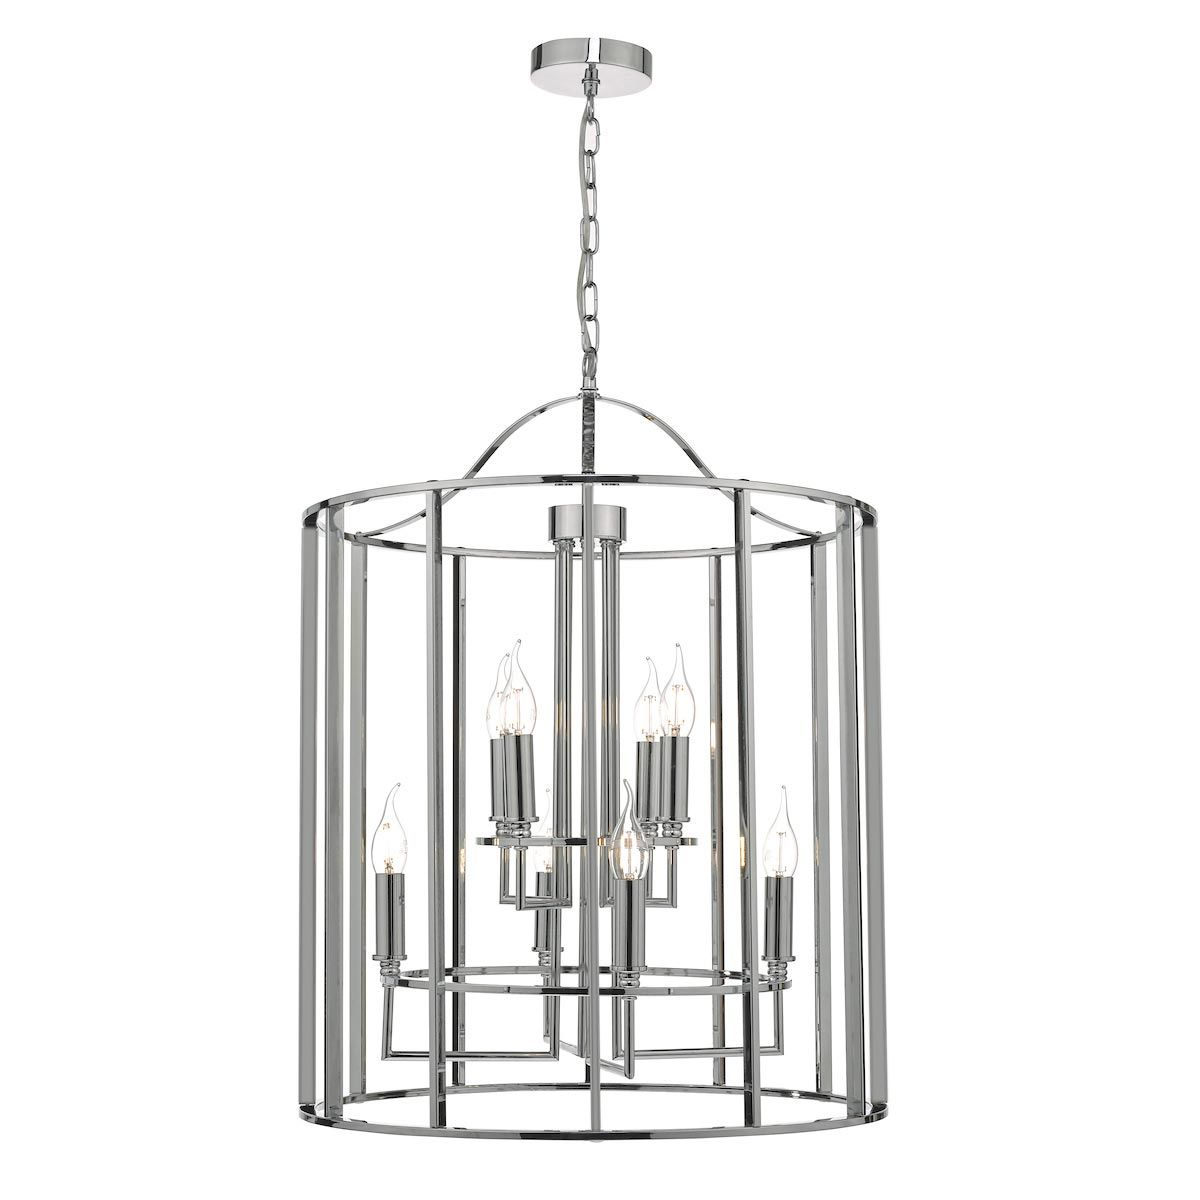 Dar Myka Modern 8 Light 2 Tier Open Hanging Lantern Polished Chrome Within Well Liked Eight Light Lantern Chandeliers (View 11 of 15)